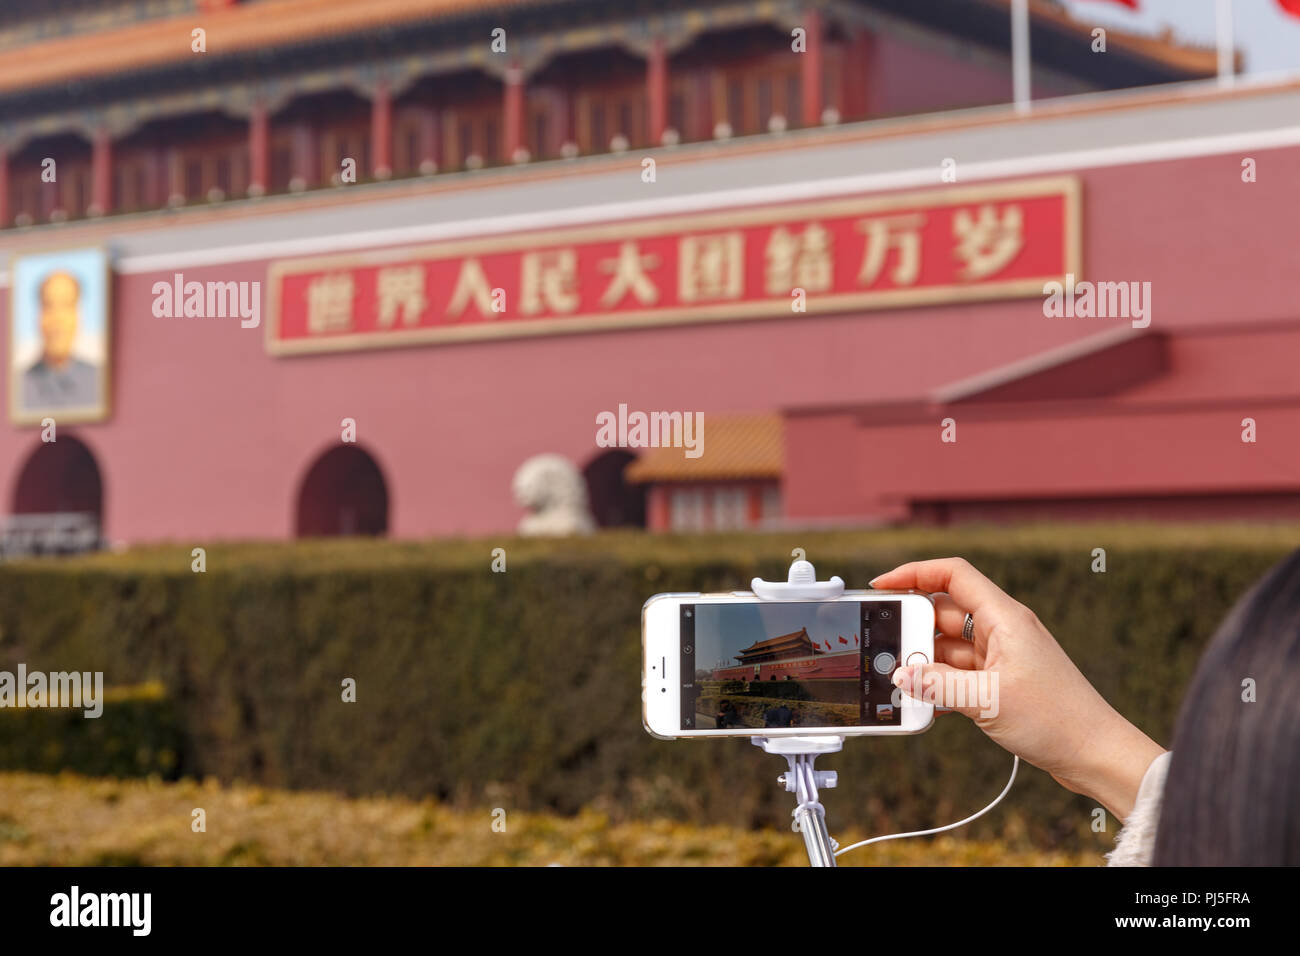 Photos being taken of Tiananmen Gate, the entrance to the imperial palace at the Forbiddan City in Beijing, China. Stock Photo